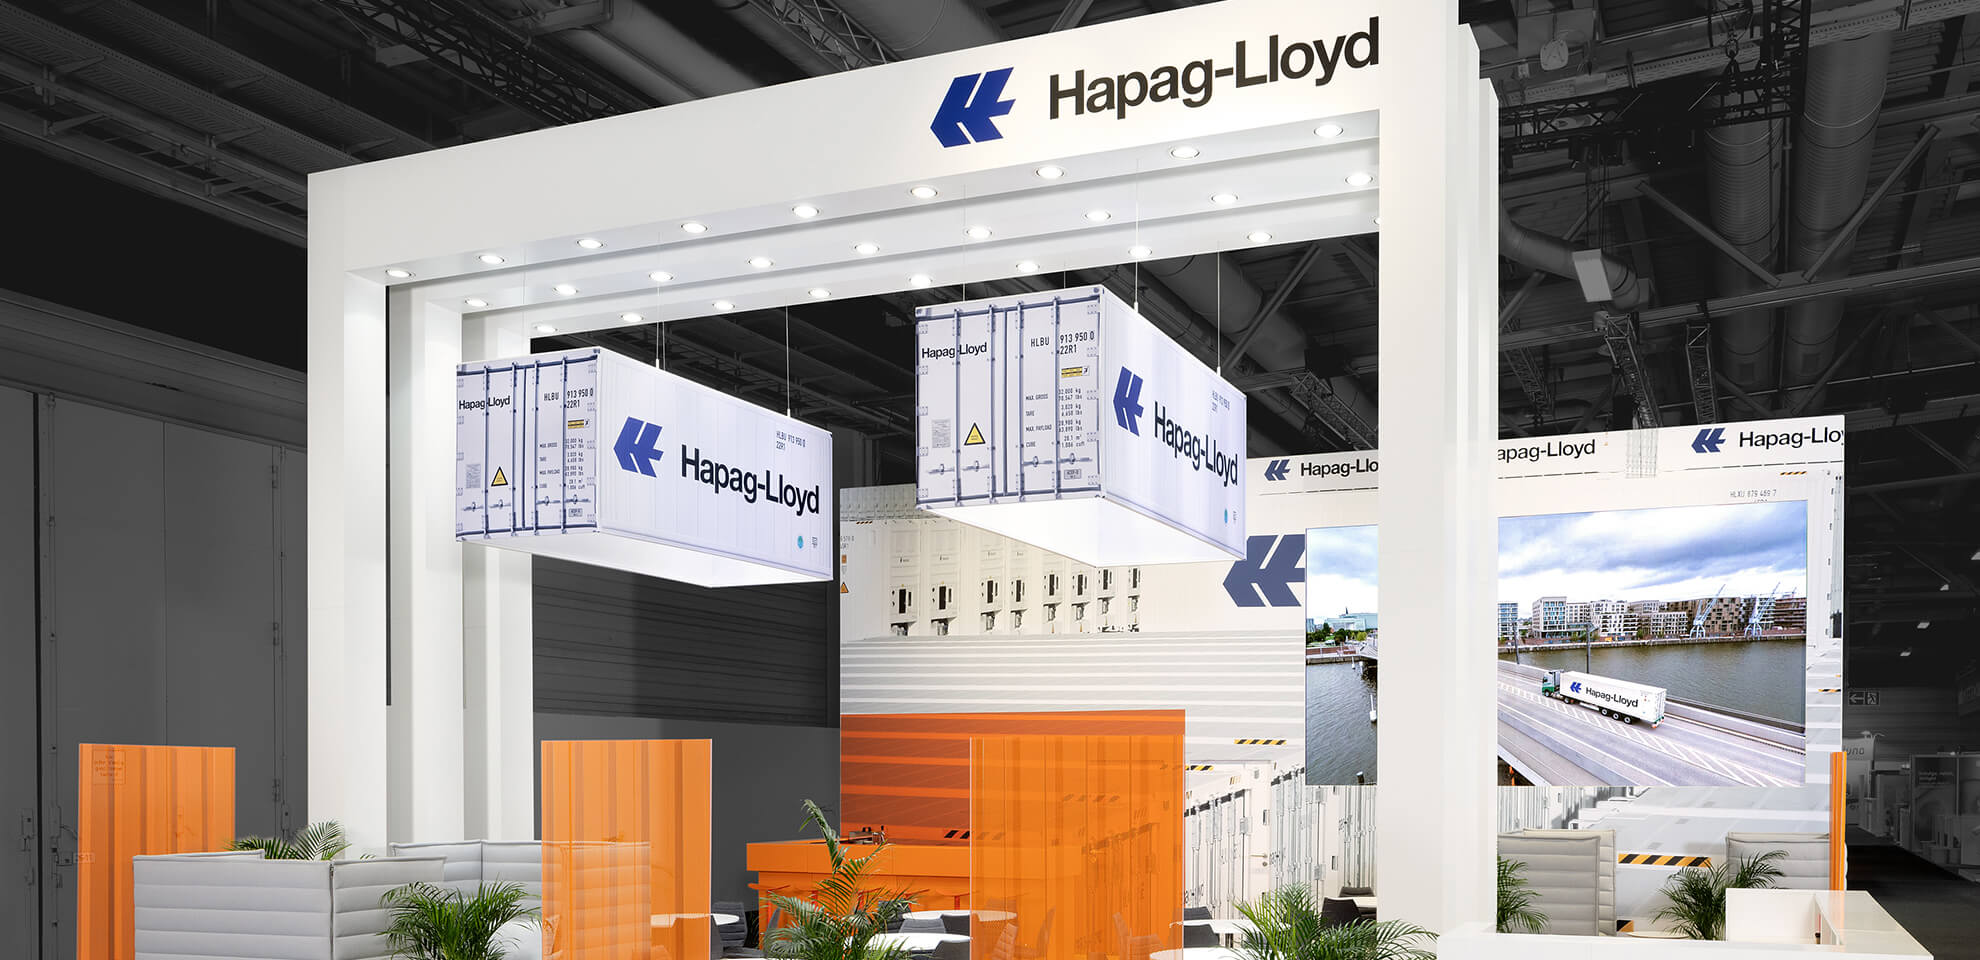 Modern trade fair presentation for Hapag-Lloyd at the Fruit Logistica in Berlin realized by Display International.